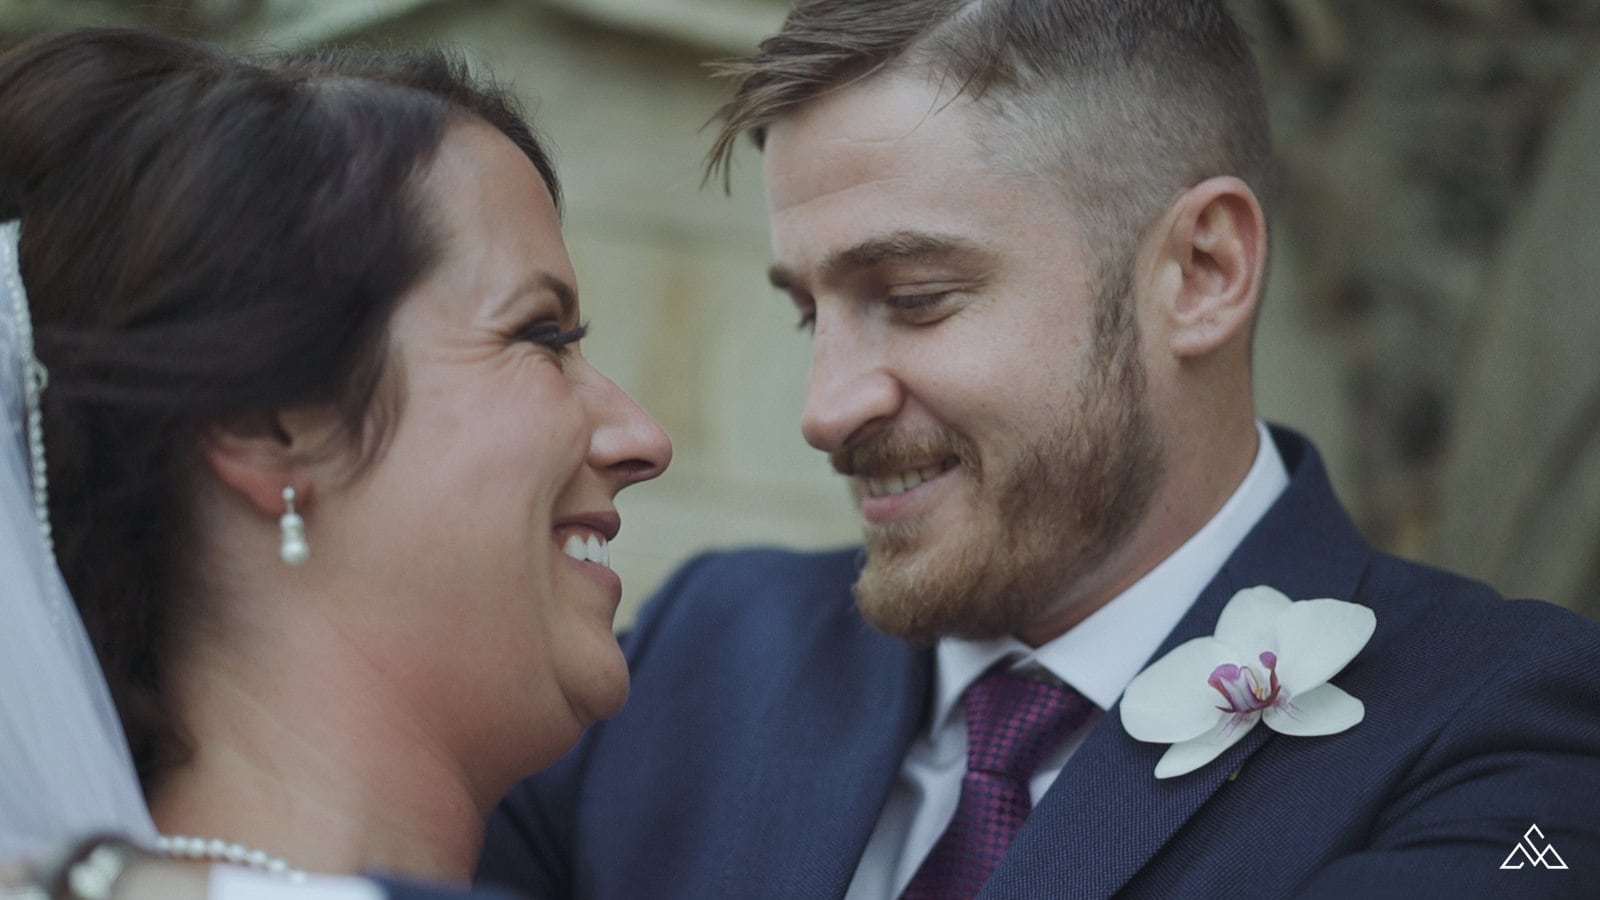 norfolk wedding videographer langley abbey mandy and kyle